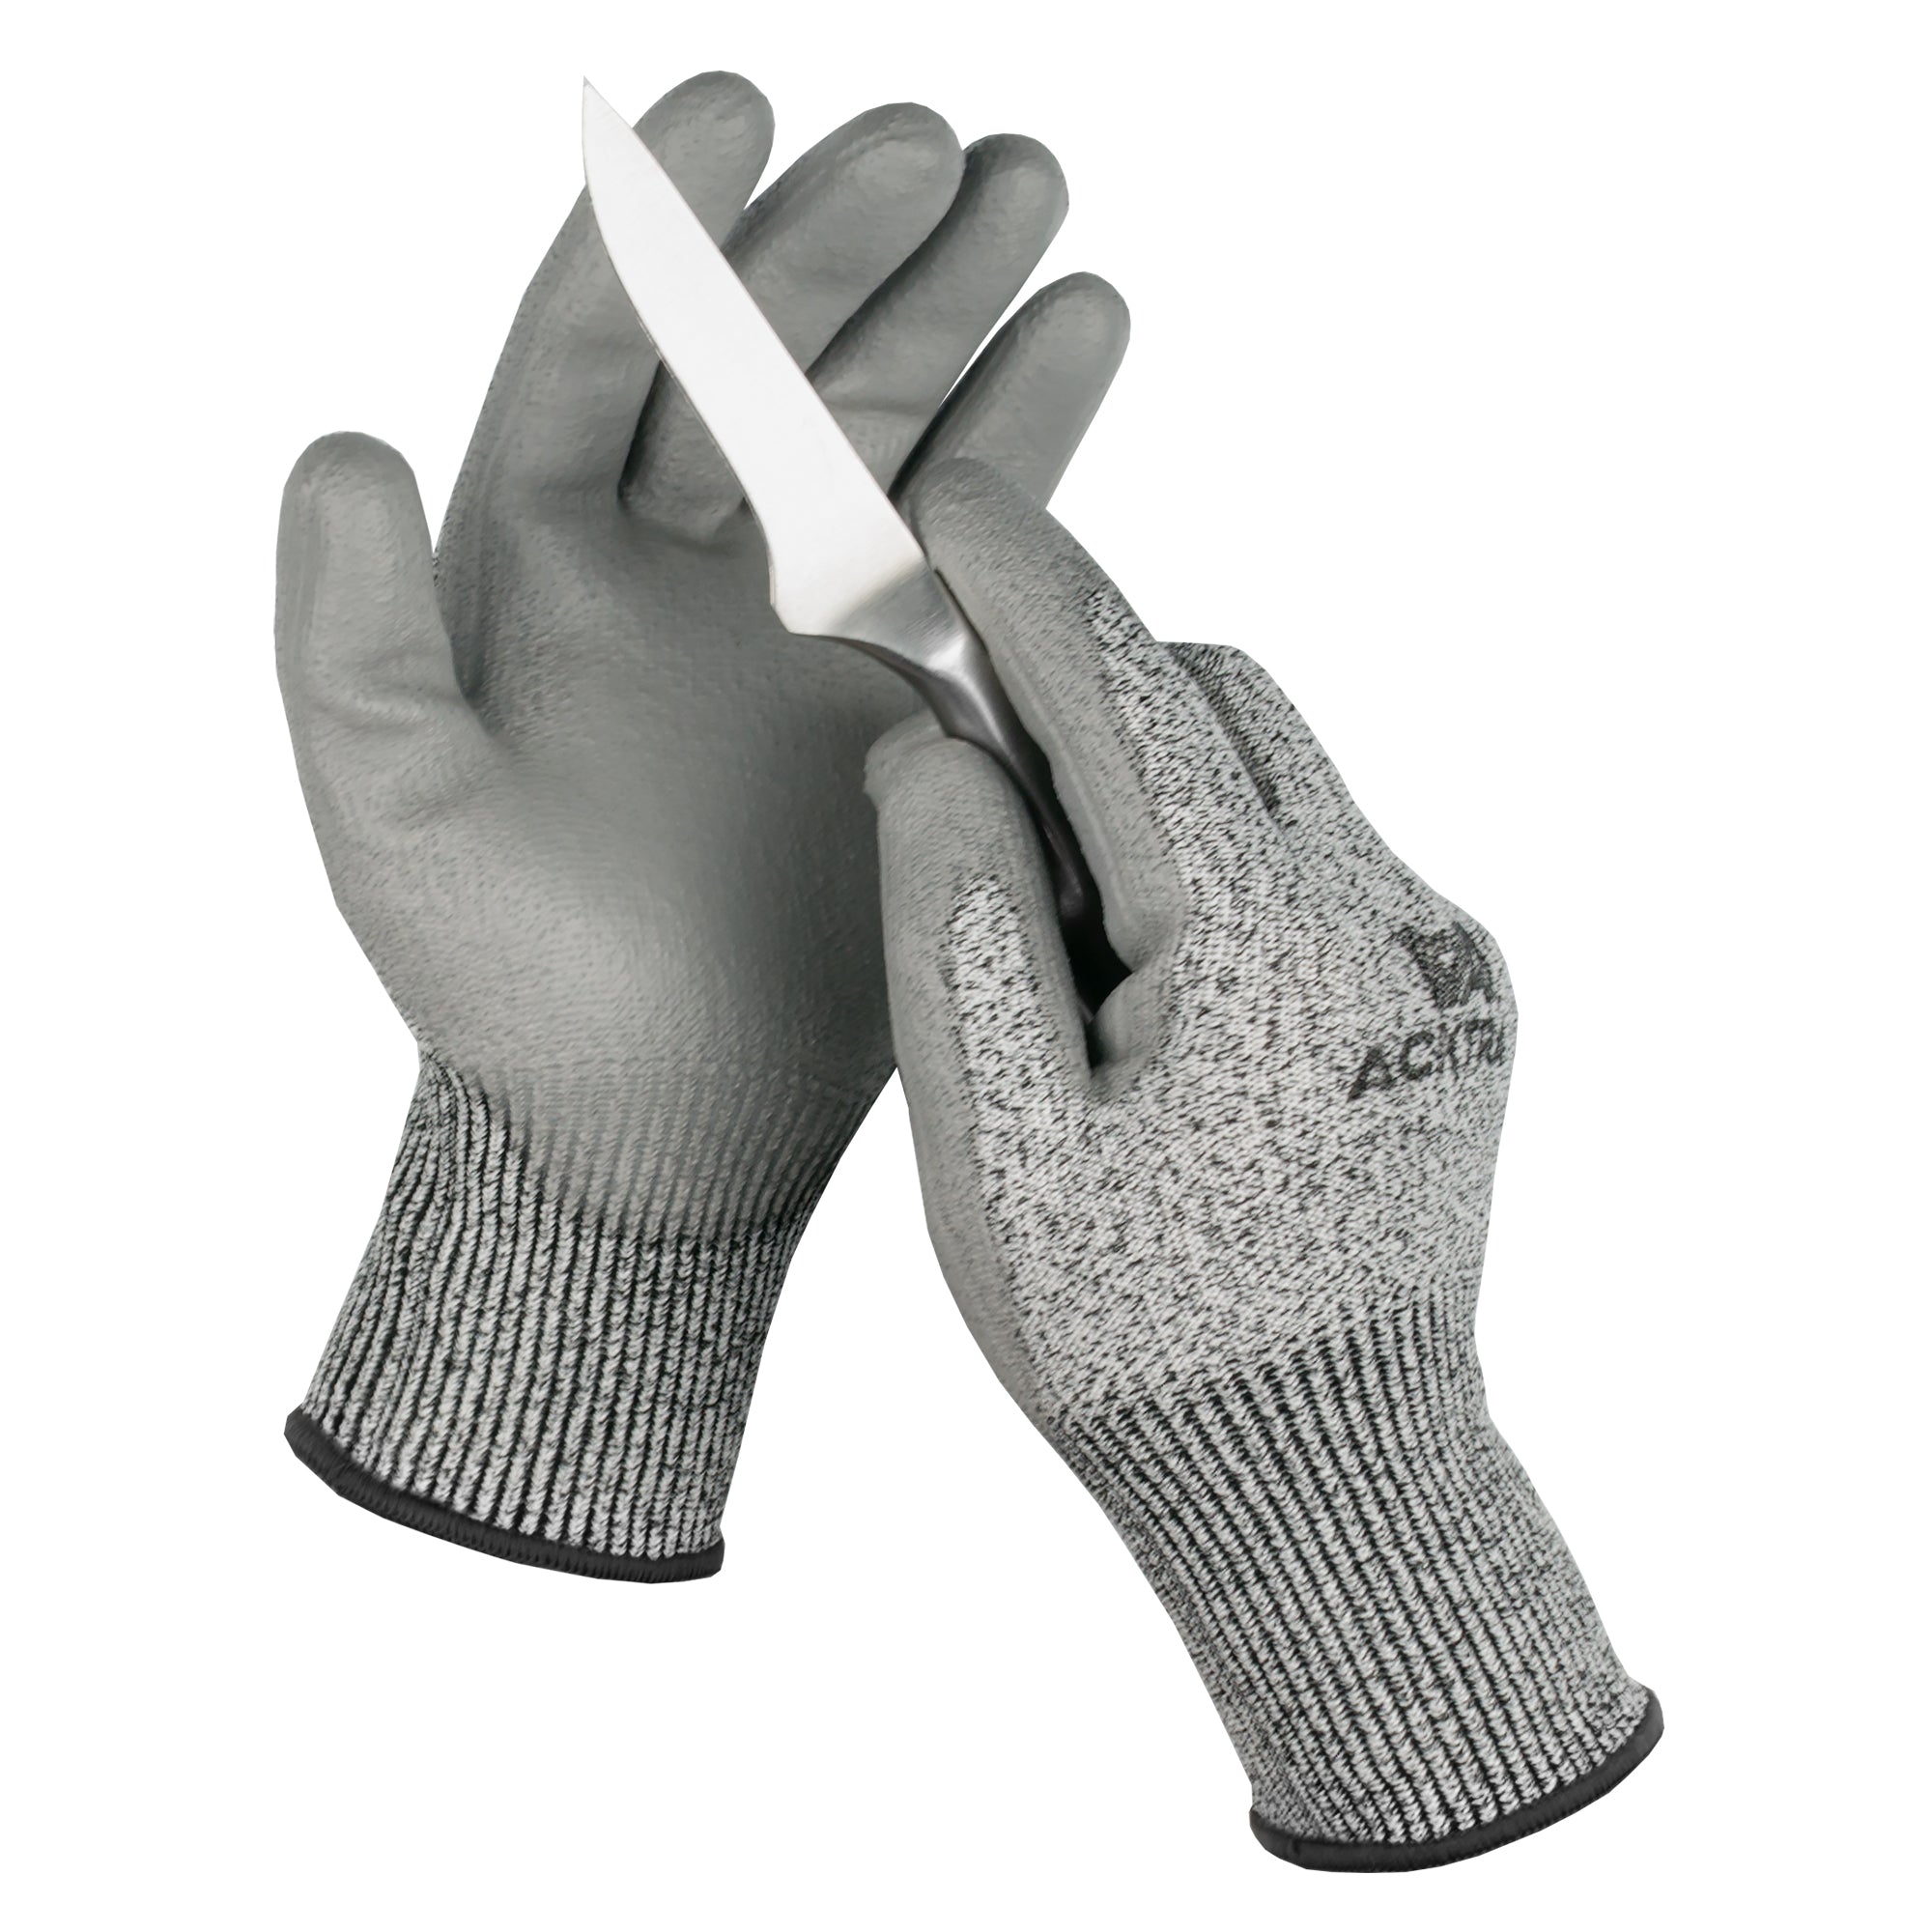 ACKTRA WG010- WG015, Level 5 Cut Resistant Safety WORK GLOVES – Acktra